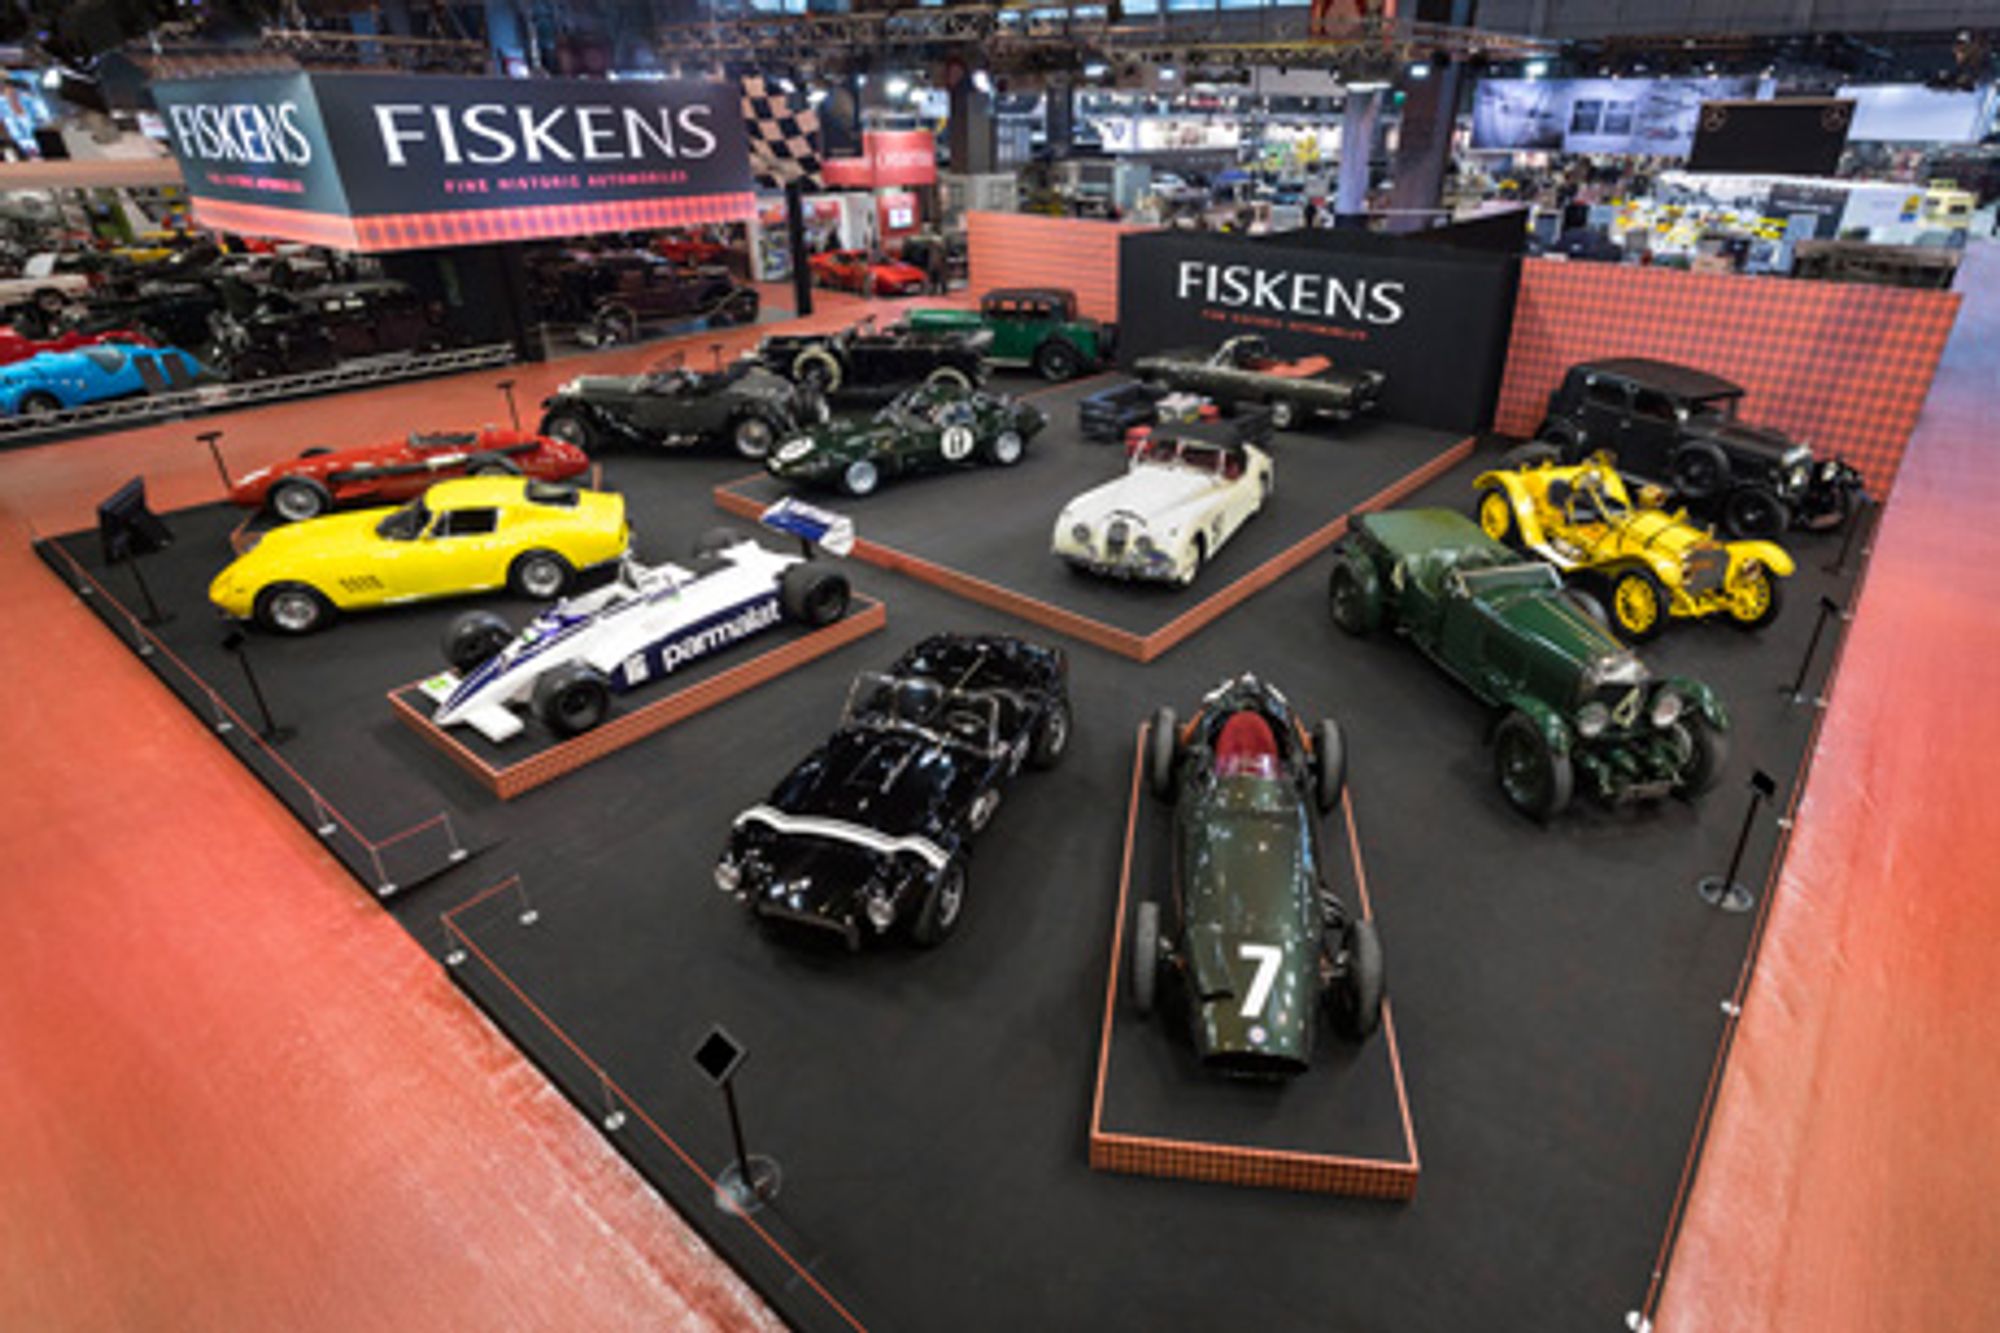 Fiskens returns from Salon Rétromobile boosted by sales from their best collection to date